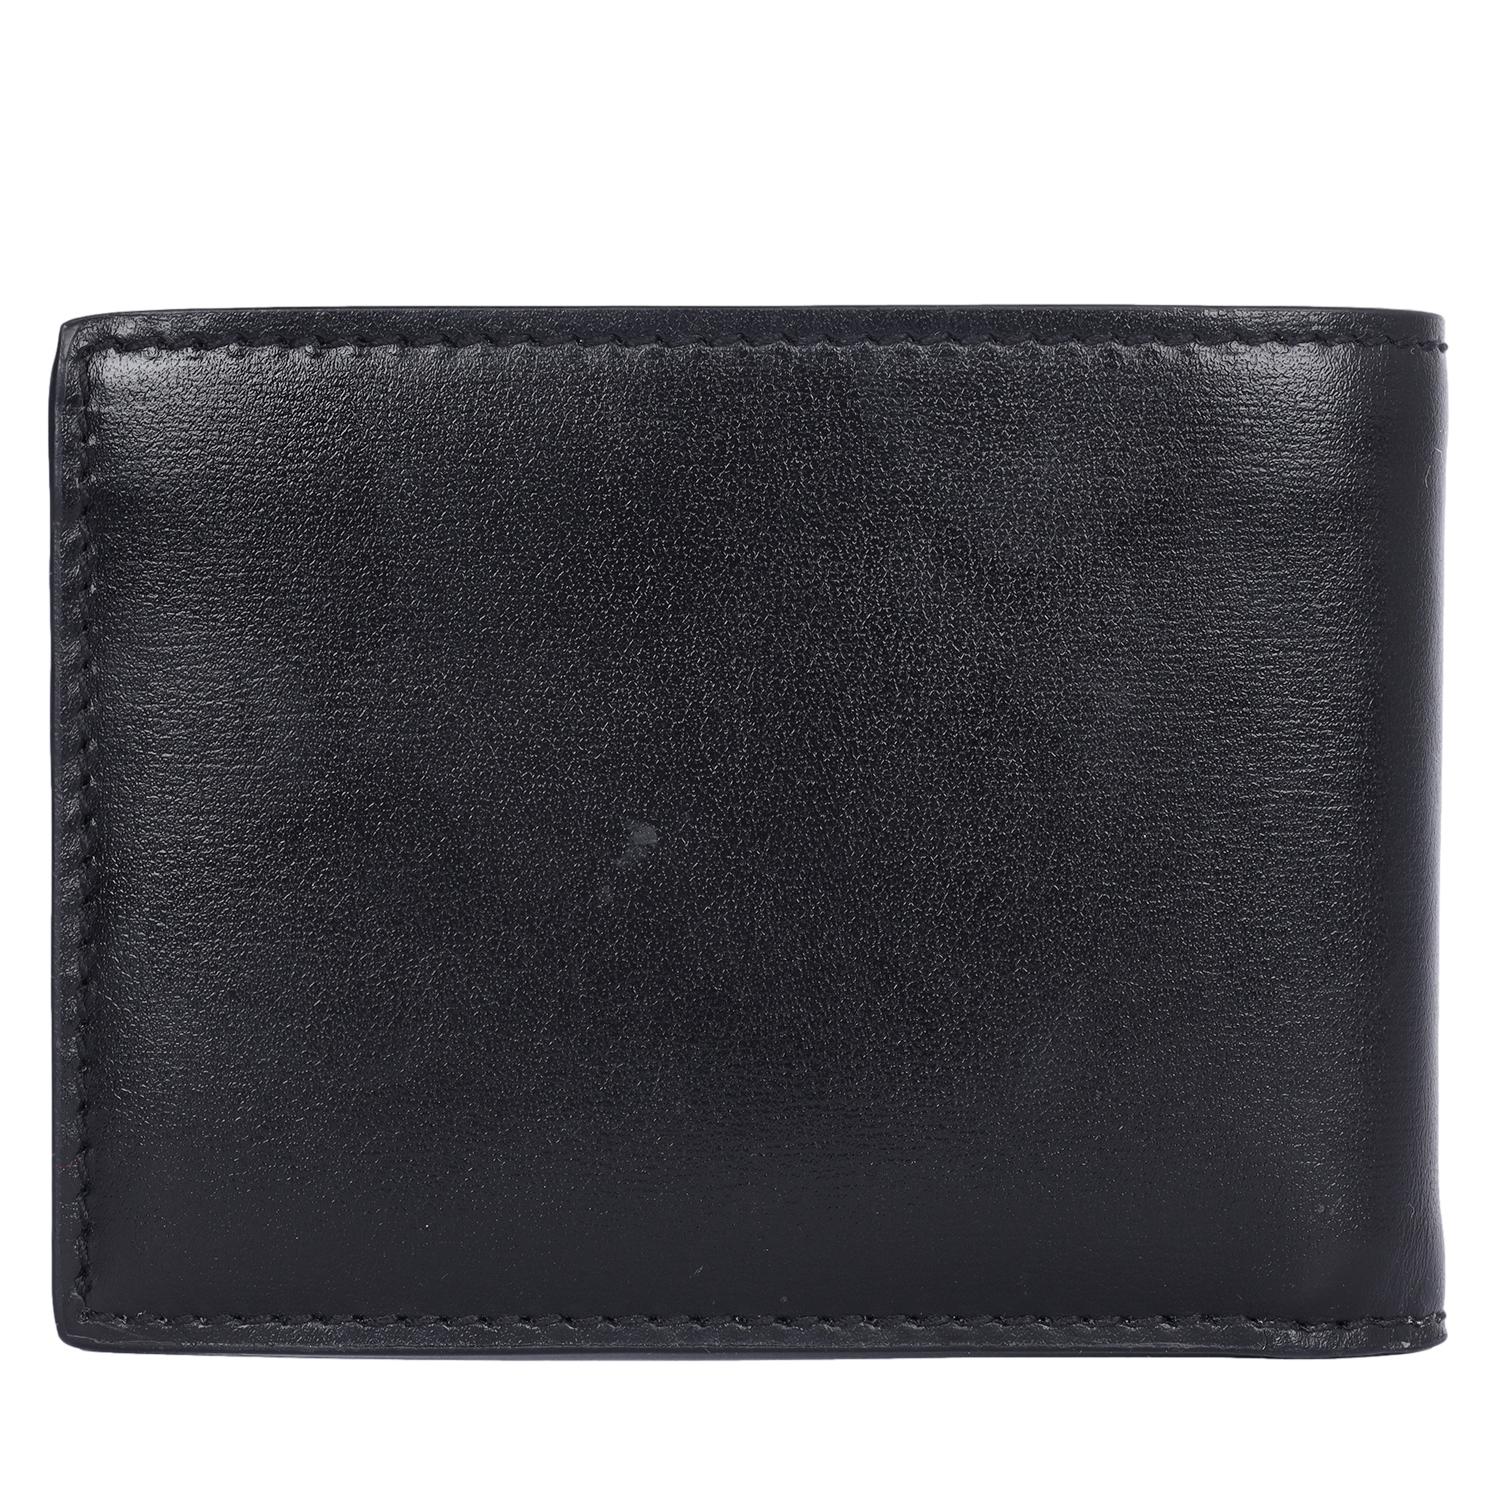 Gucci GG Marmont Black Leather Bi Fold Wallet For Sale 1